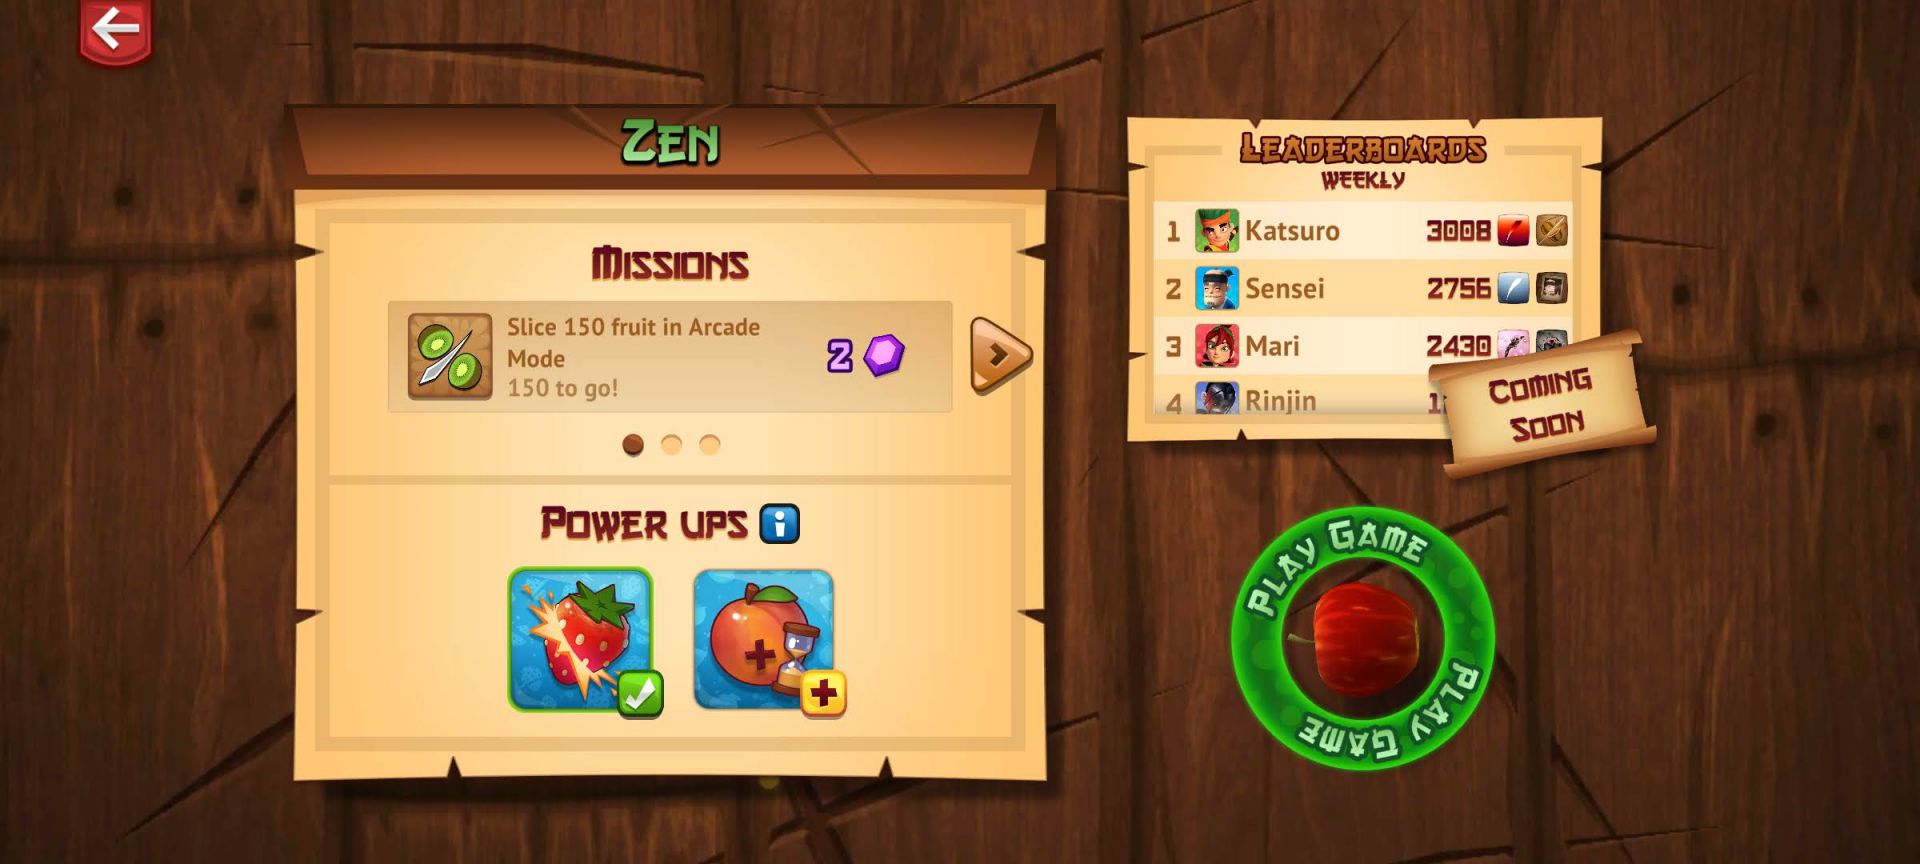 Fruit Ninja® Game for Android - Download